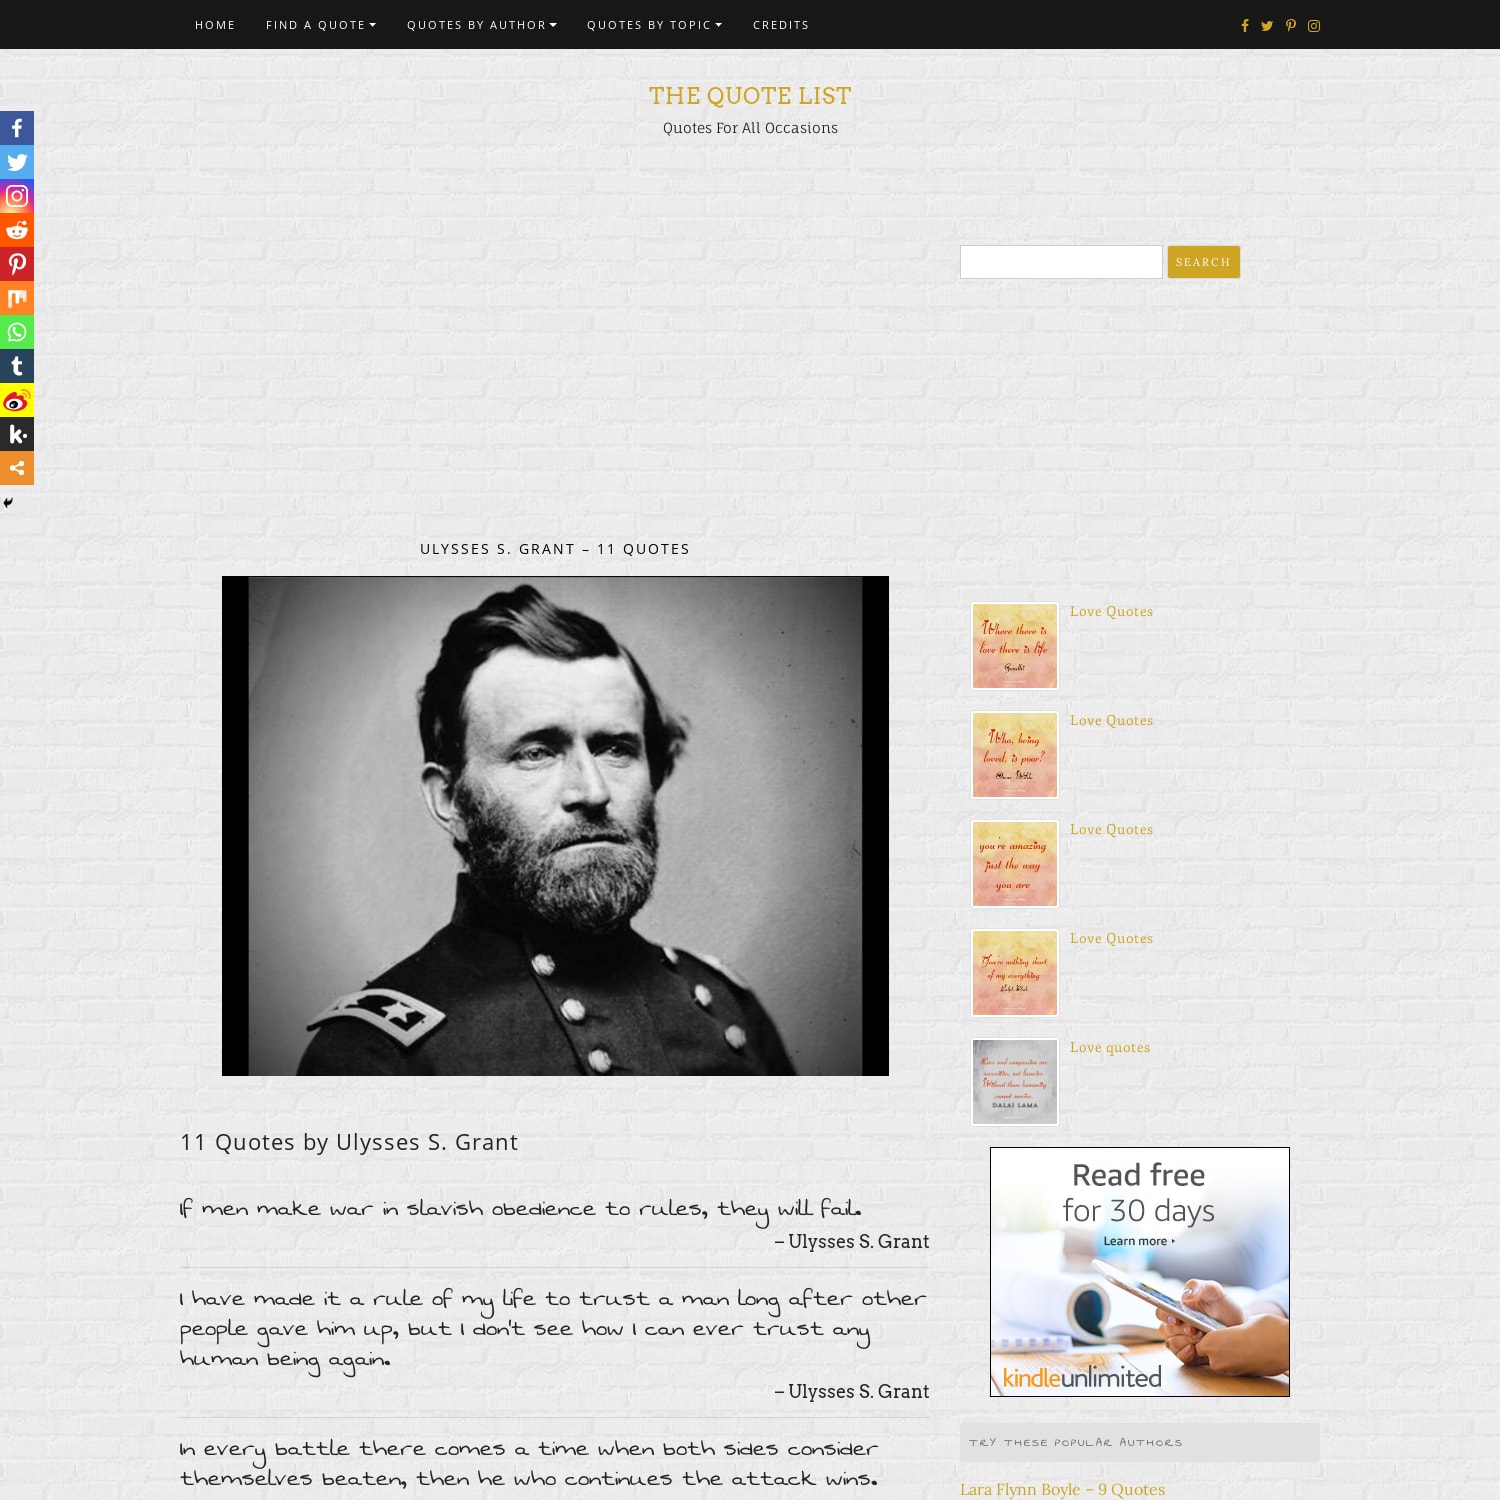 11 Quotes by Ulysses S. Grant